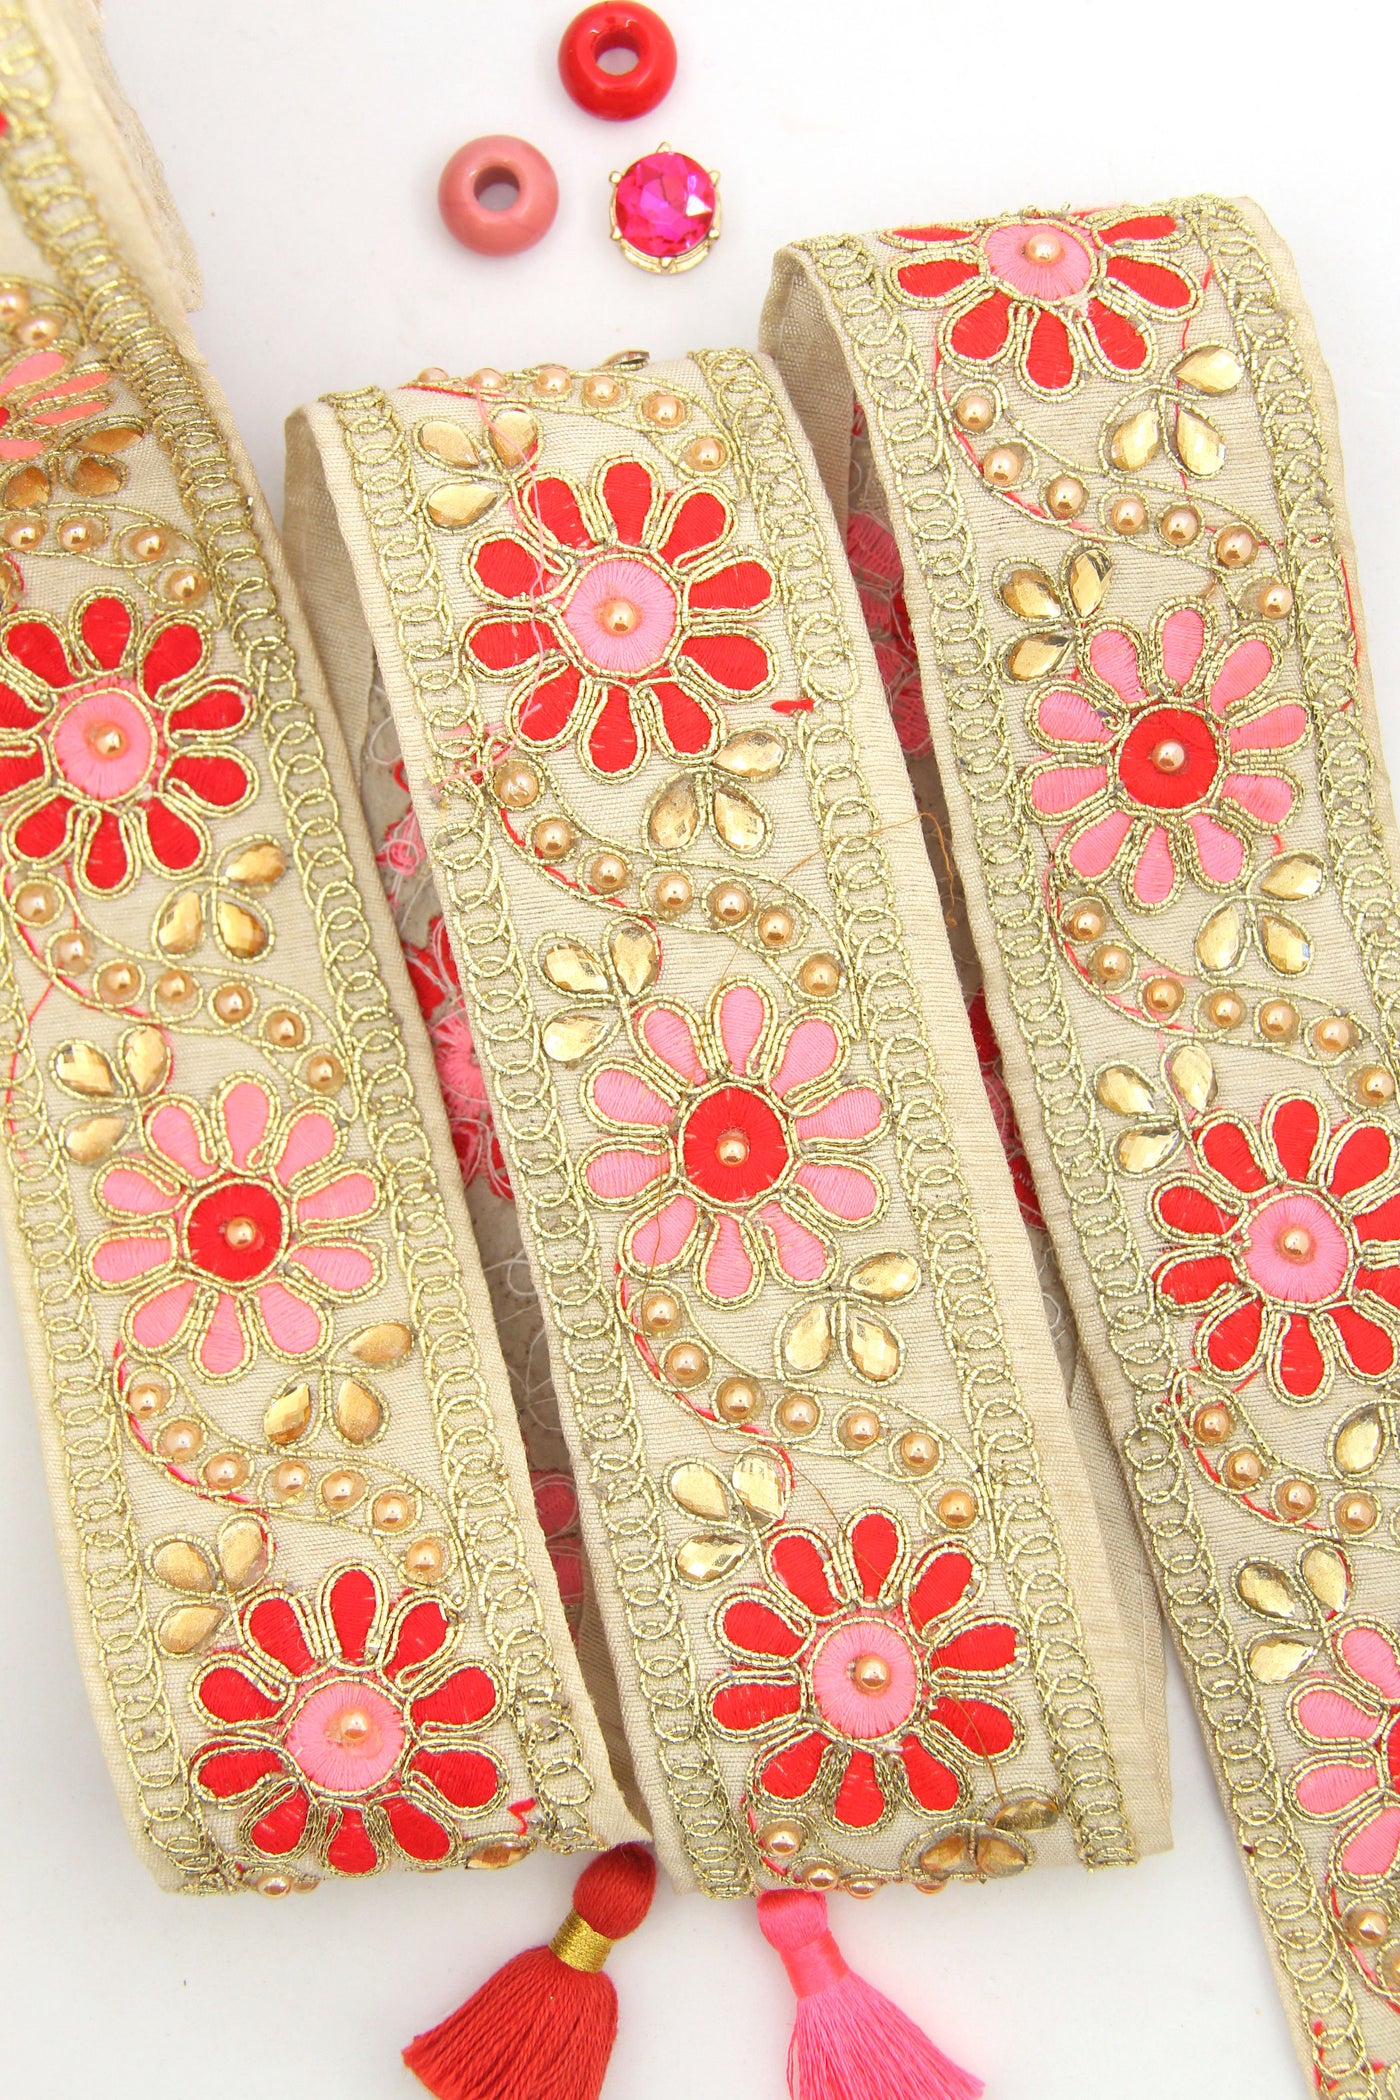 Sequined Admirer: 2.125" Metallic Embroidered Silk Ribbon from India, Sari Trim by the Yard